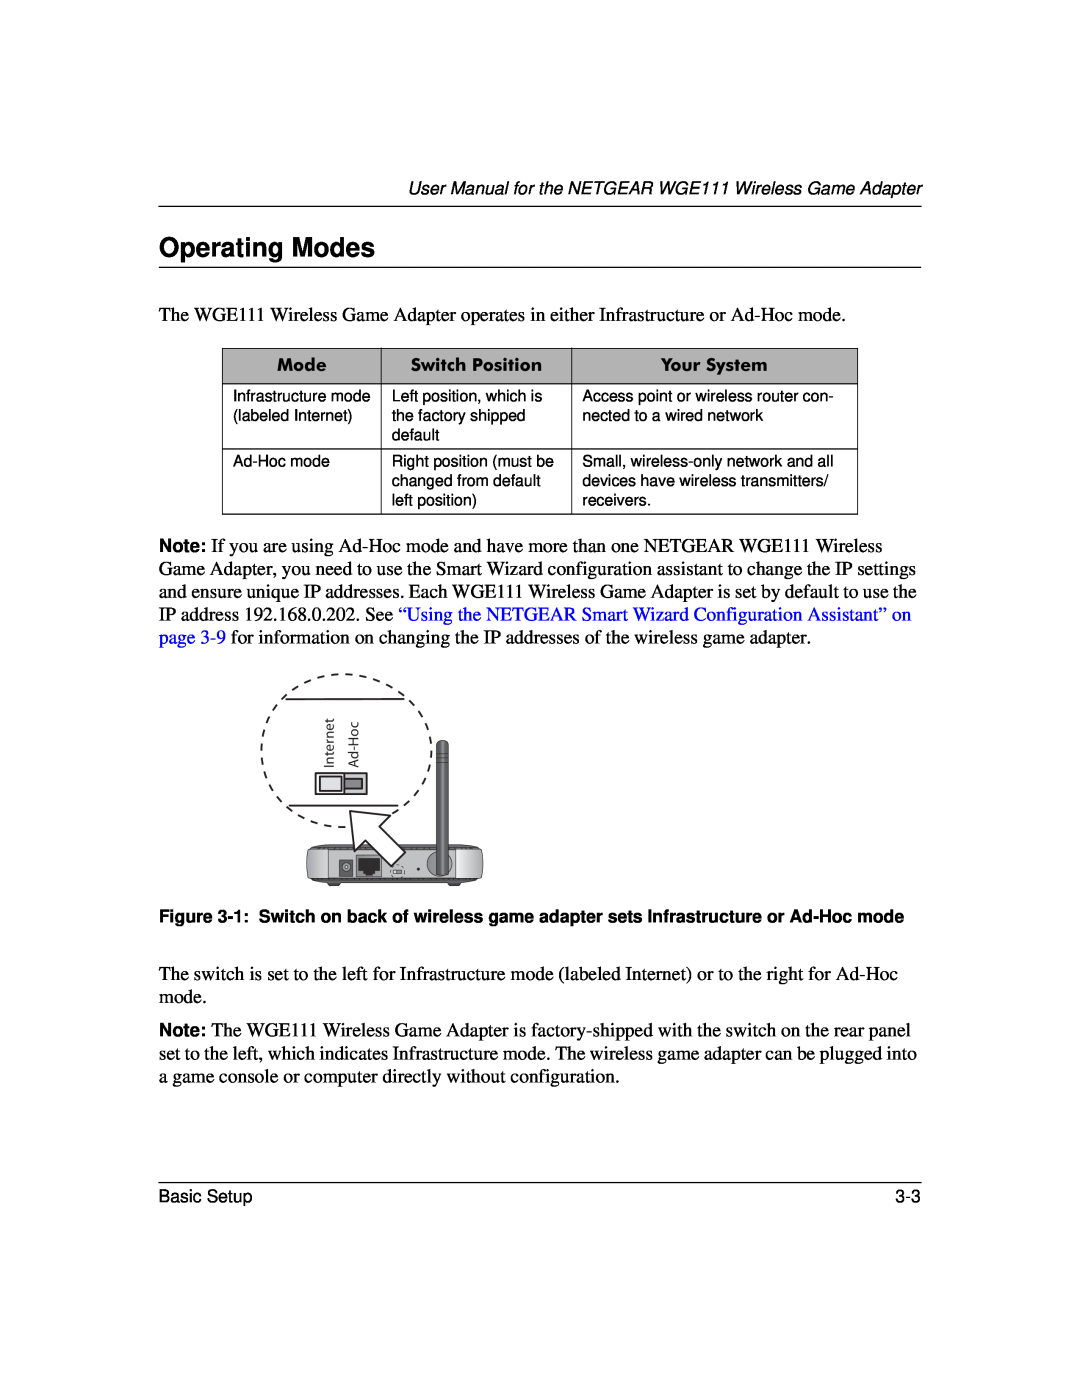 NETGEAR WGE111 user manual Operating Modes, Switch Position, Your System 